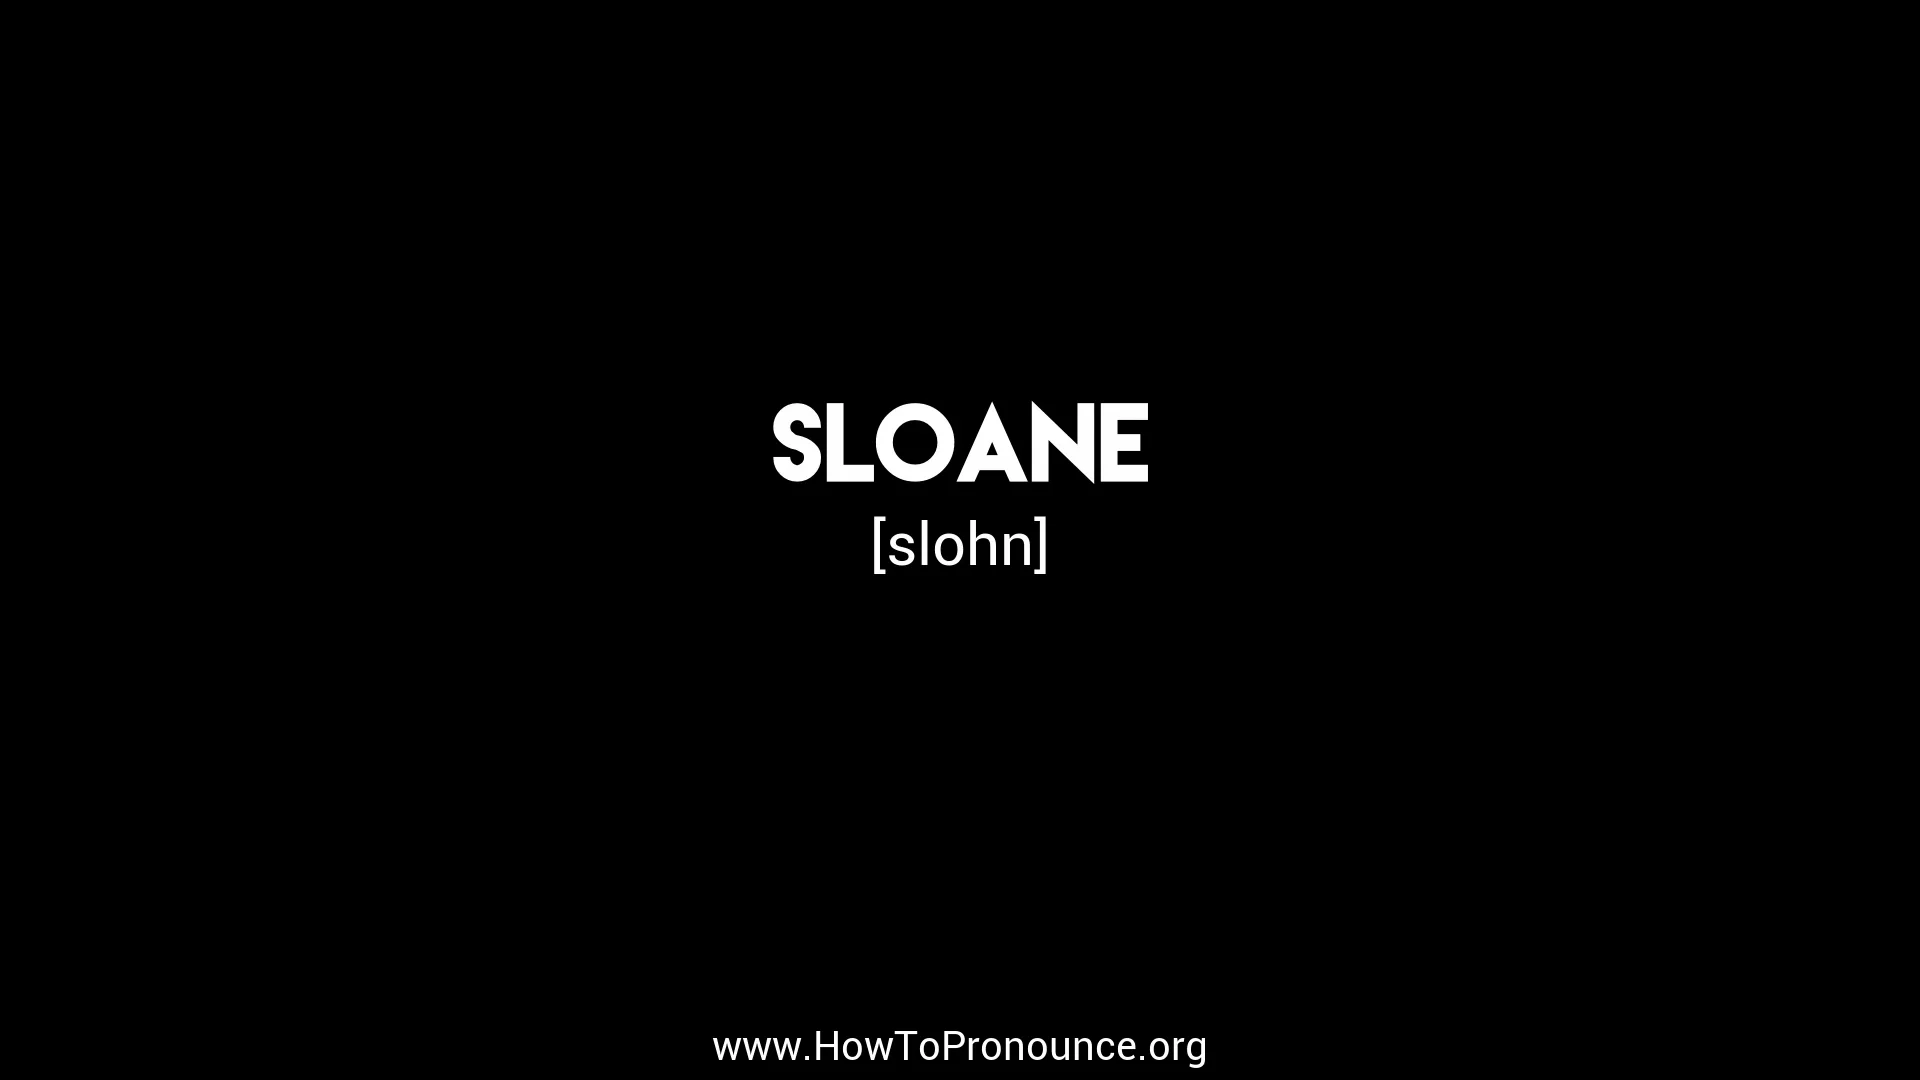 How to pronounce alone